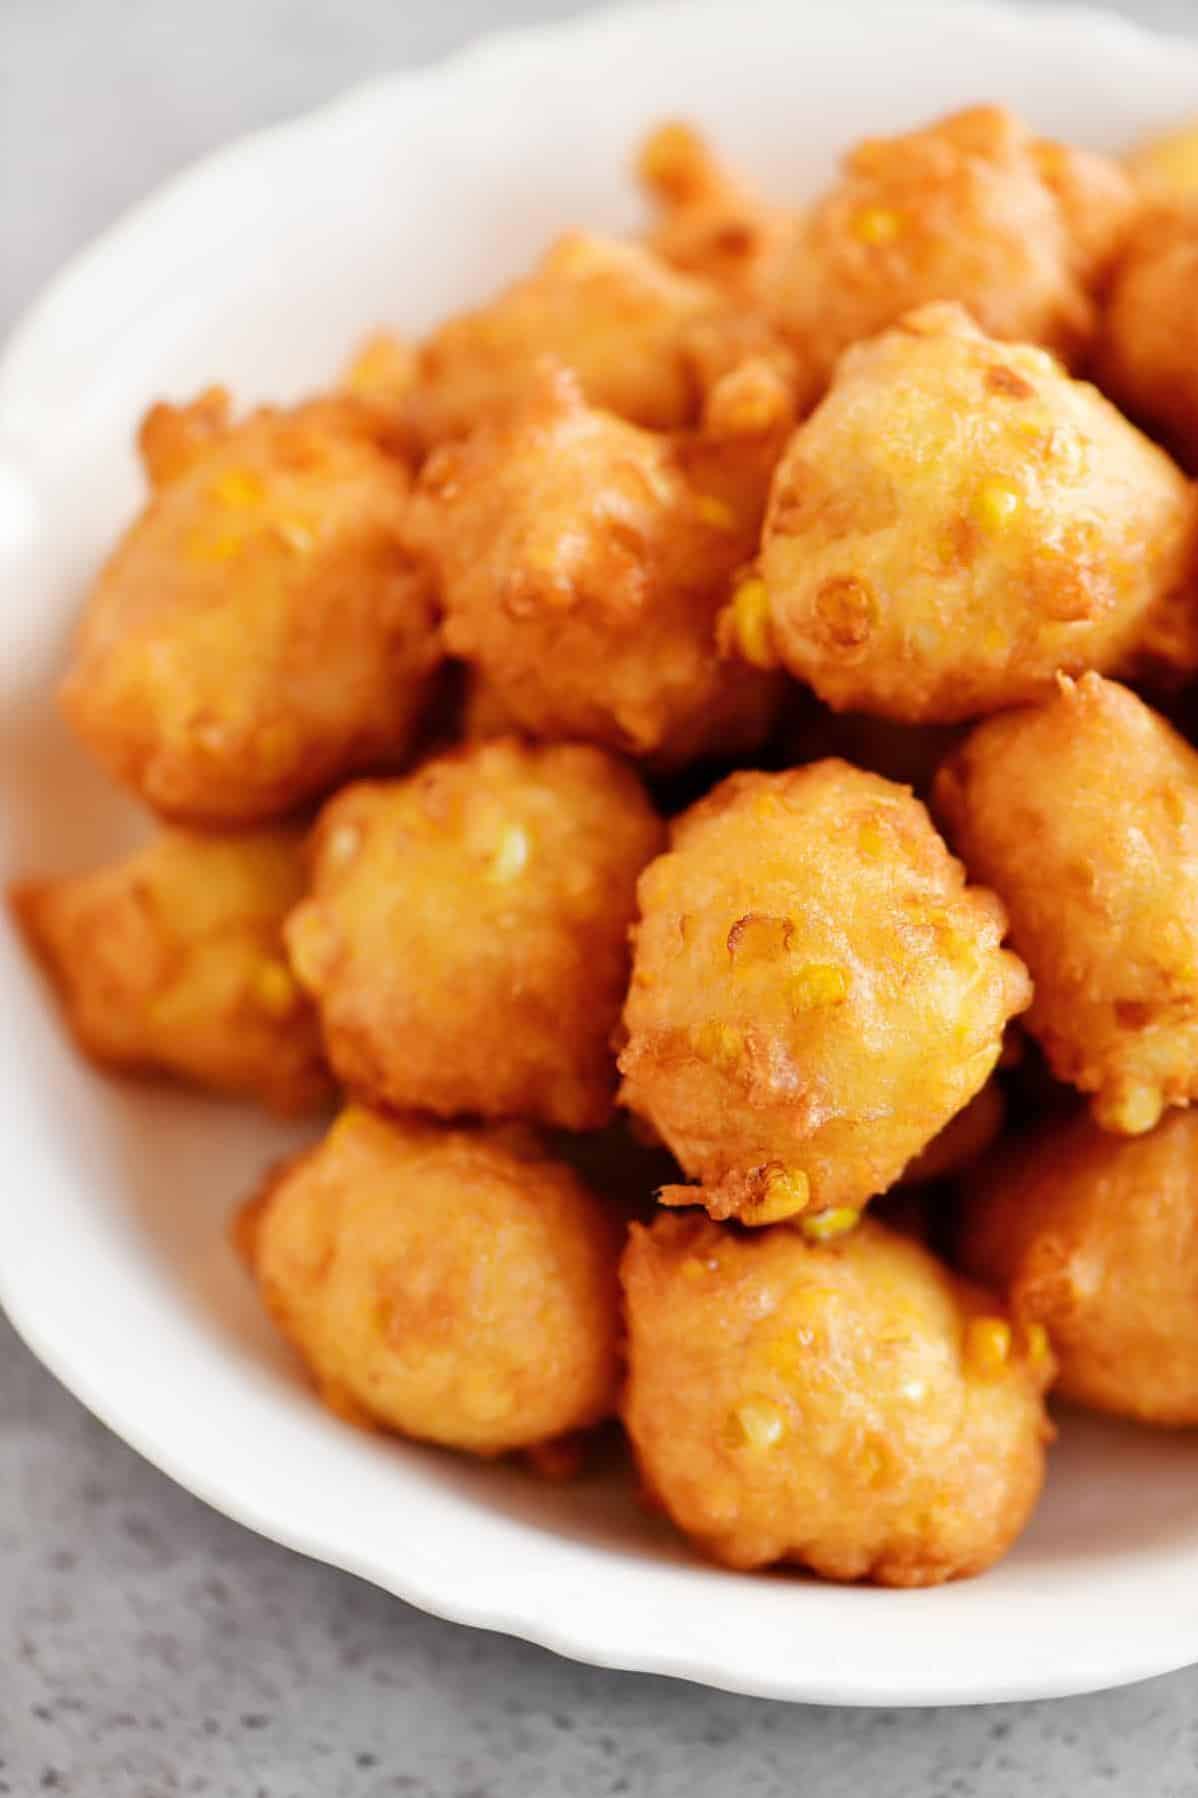  These fritters are so easy to make, you'll be enjoying them in no time!